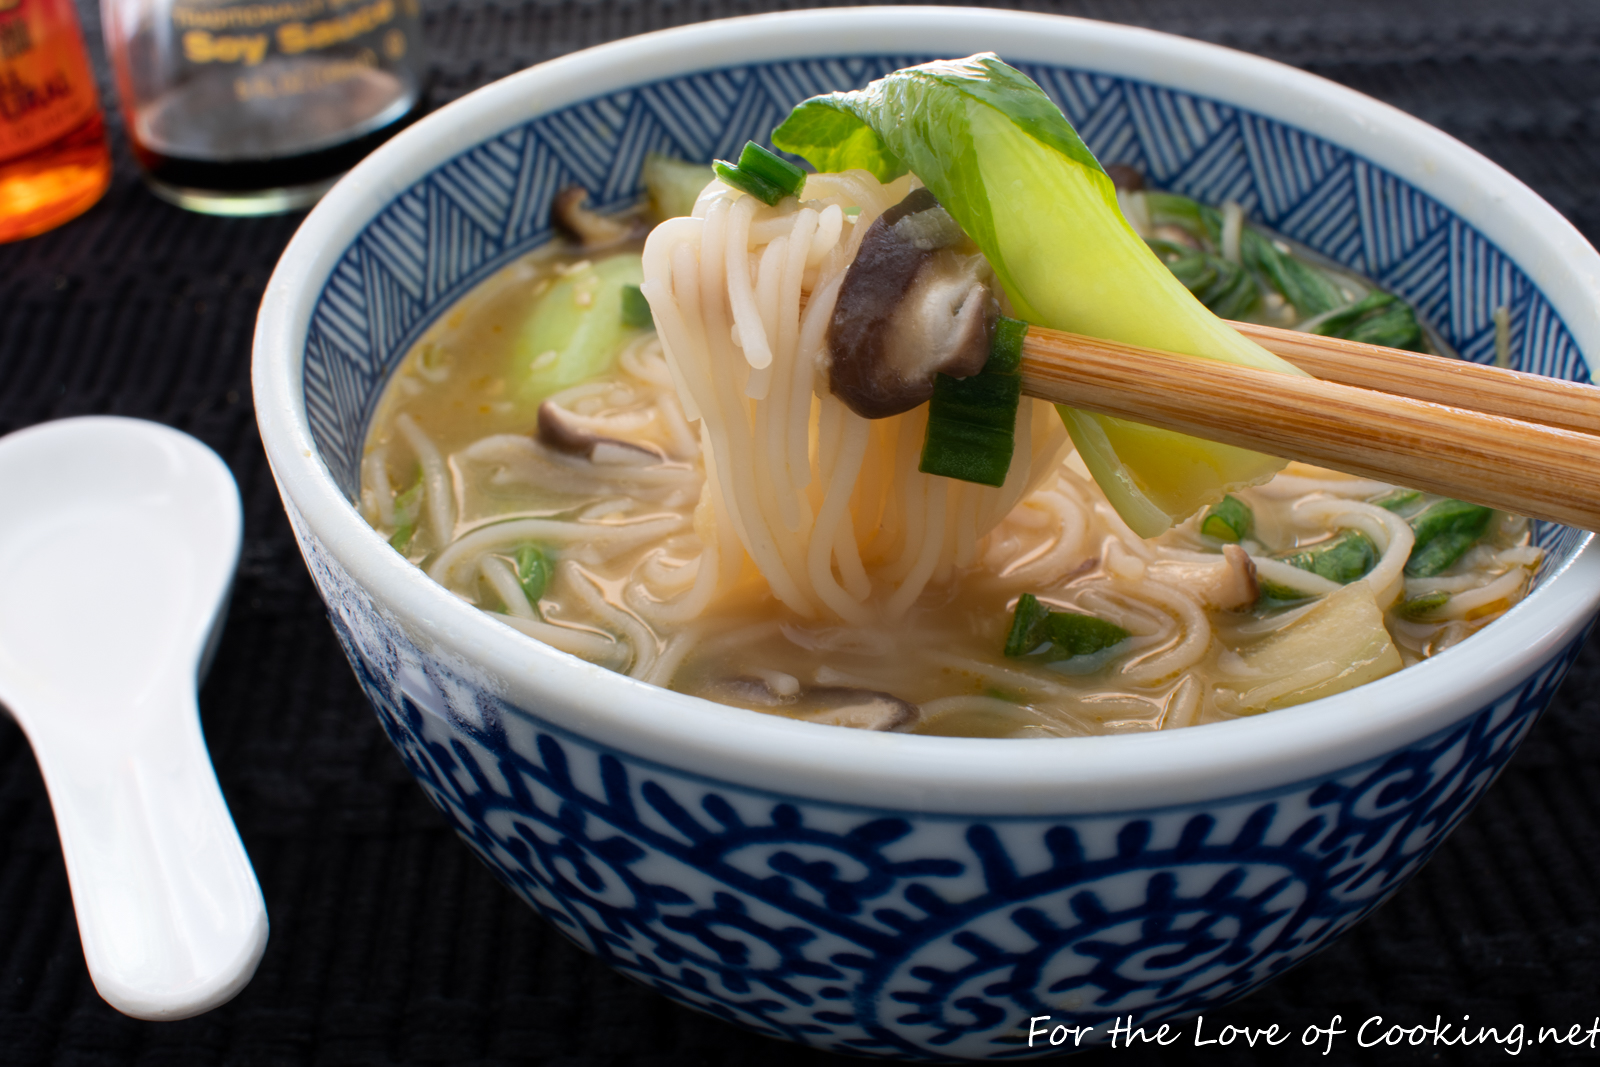 Ginger Garlic Noodle Soup with Bok Choy and Shiitake Mushrooms